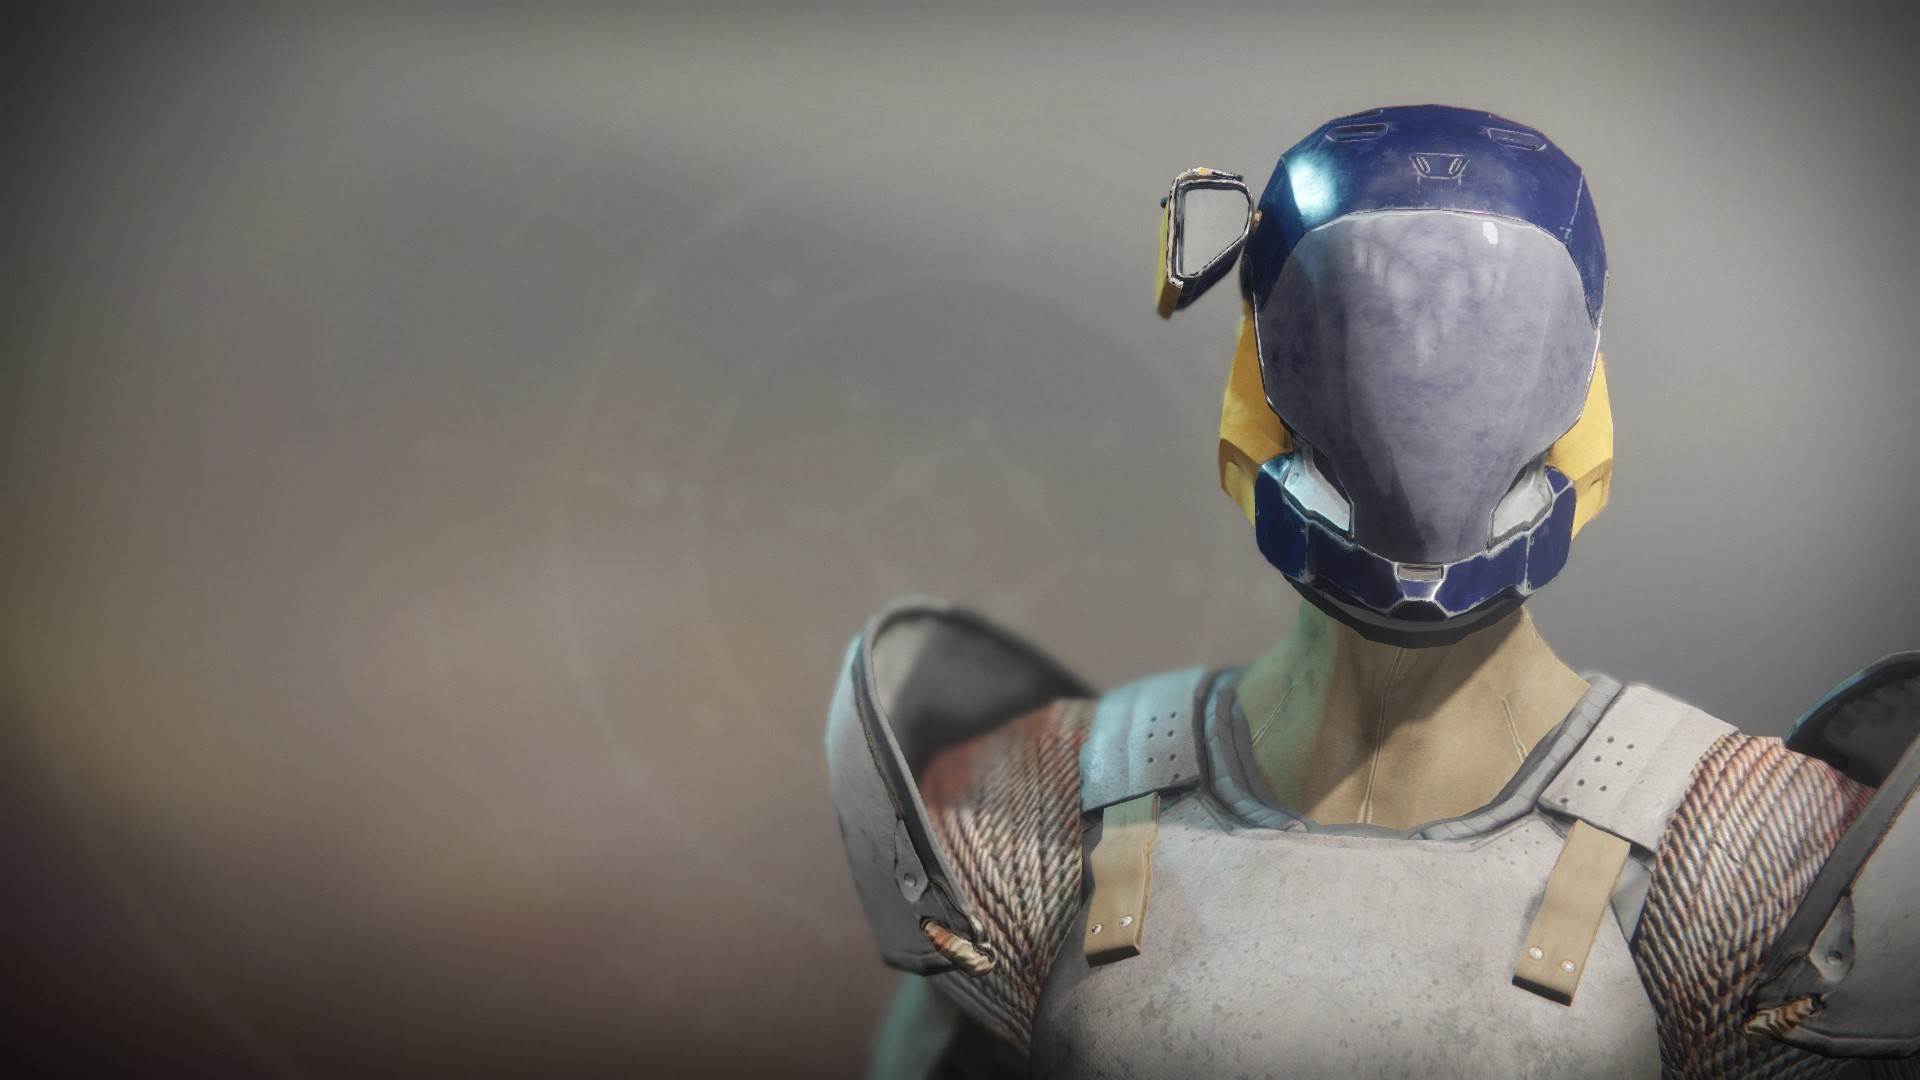 An in-game render of the Simulator Helm.